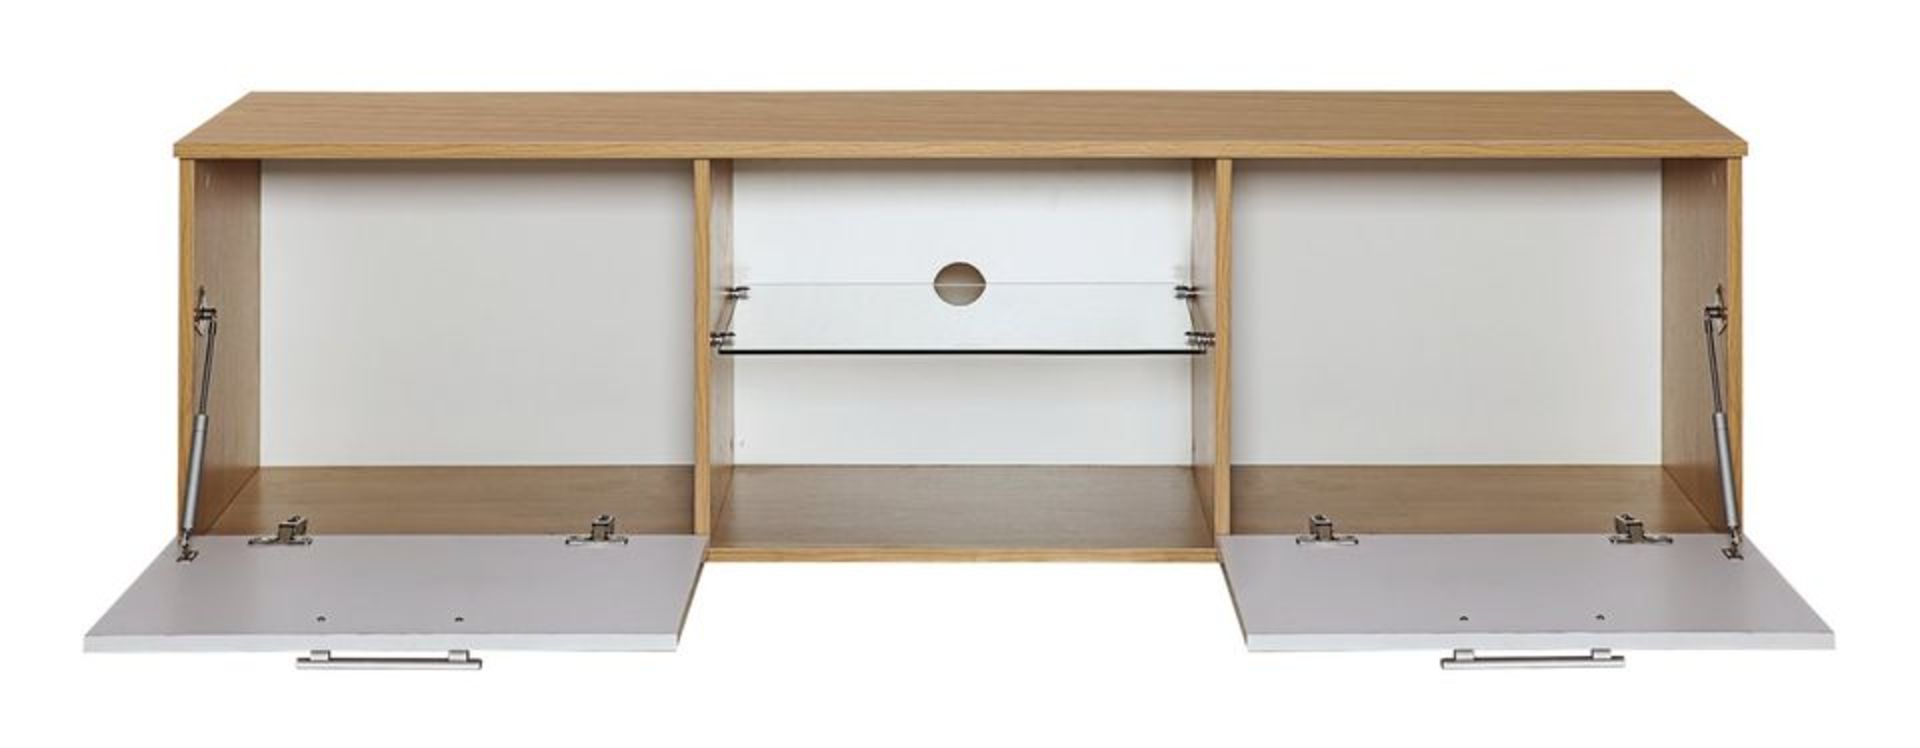 BRAND NEW 160CM WHITE ON OAK TV STAND (TV32) - Image 9 of 10